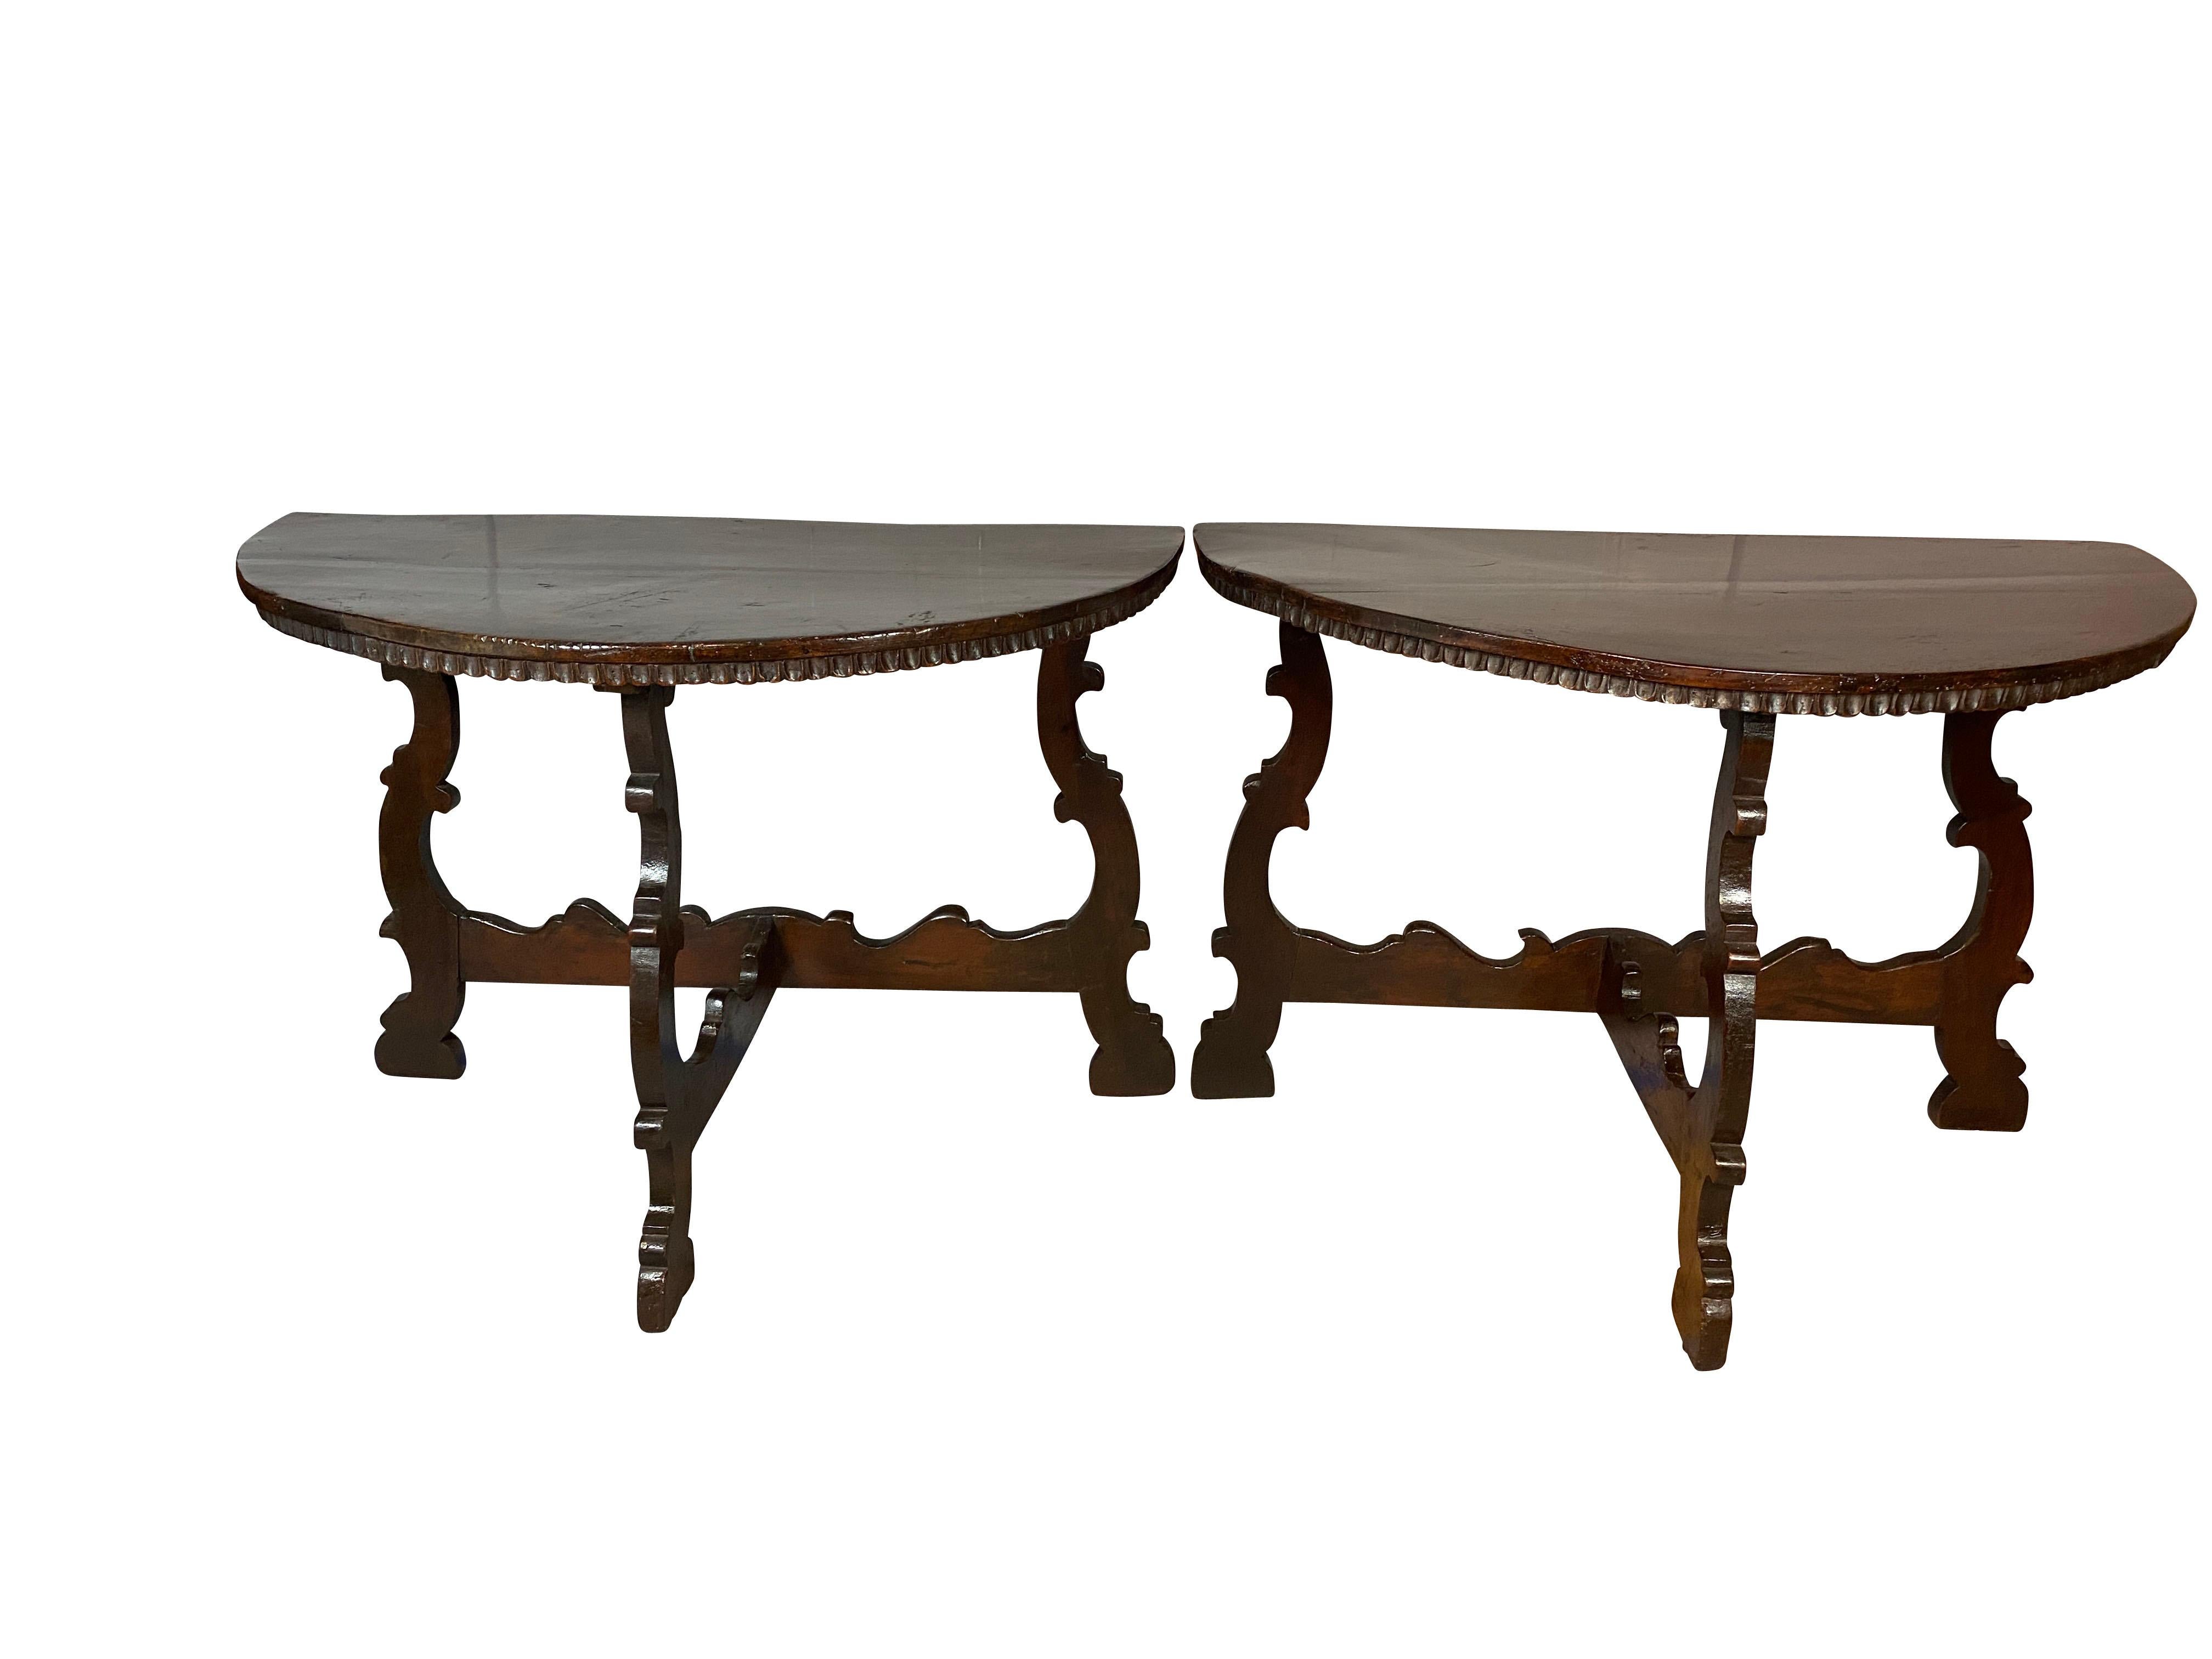 D shaped top with fluted molding over scroll legs with conforming stretchers.